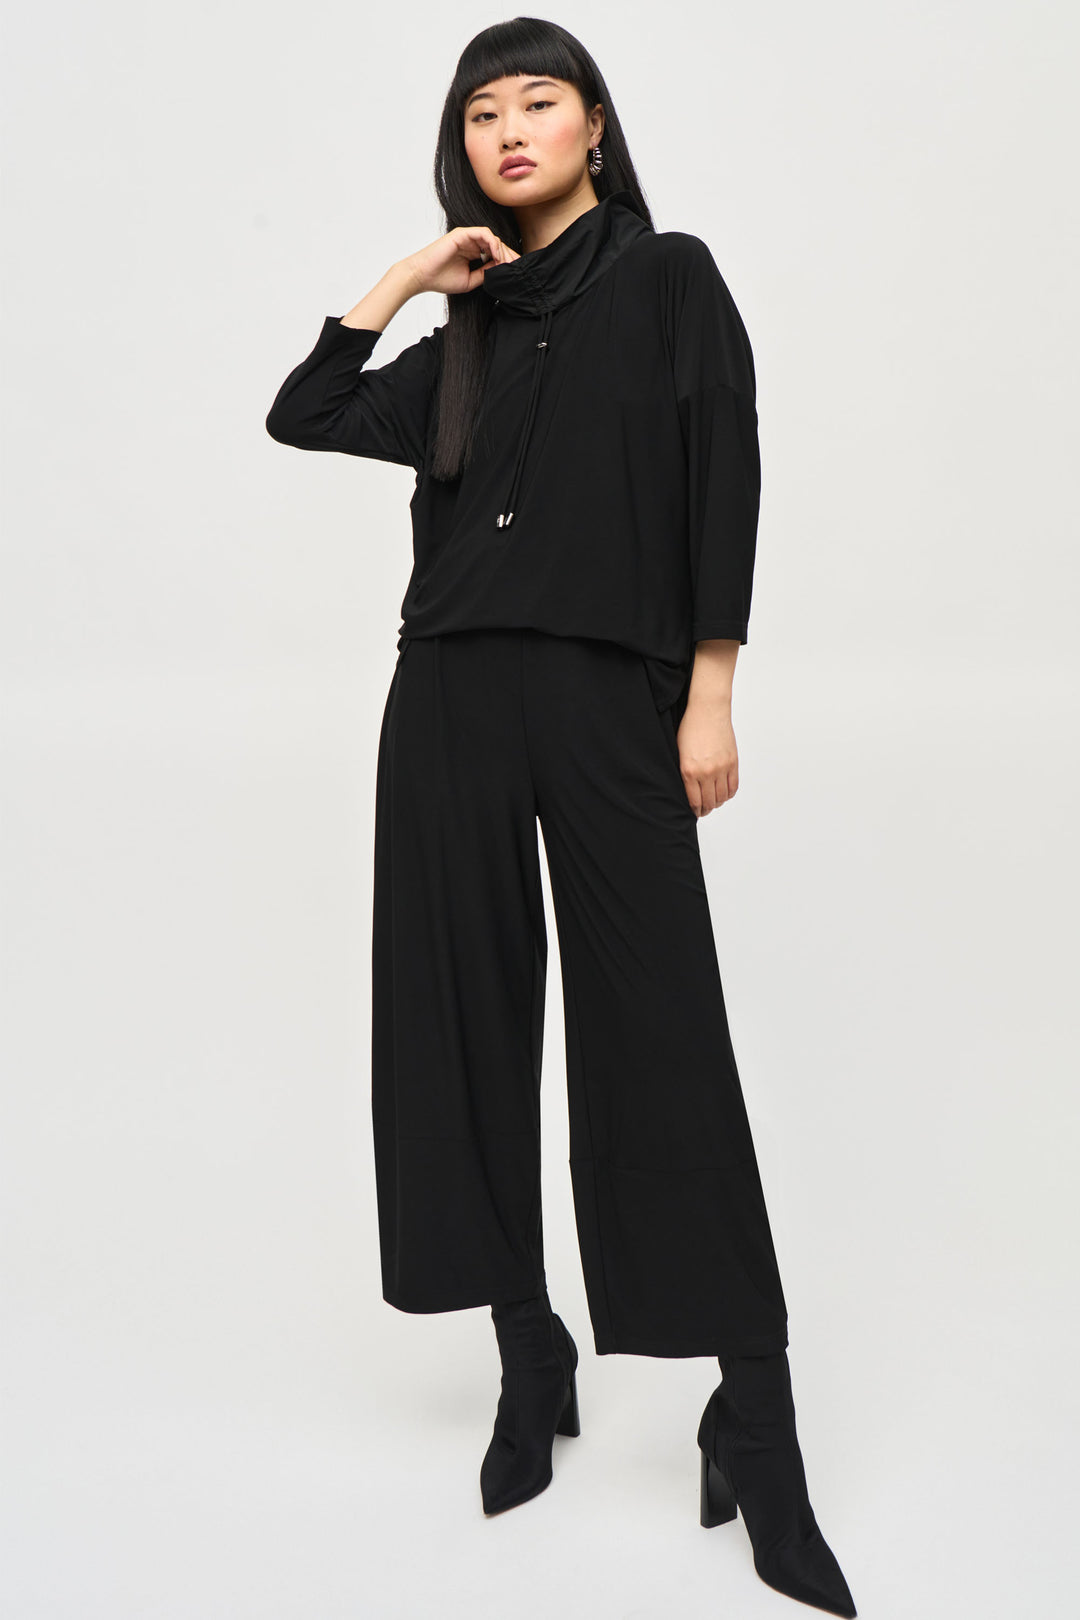 Joseph Ribkoff Fall 2024 Stay stylish and comfortable with our Cowl Neck Jumpsuite Featuring 3/4 length sleeves and a wide leg pant, this all-in-one piece is simple yet chic.